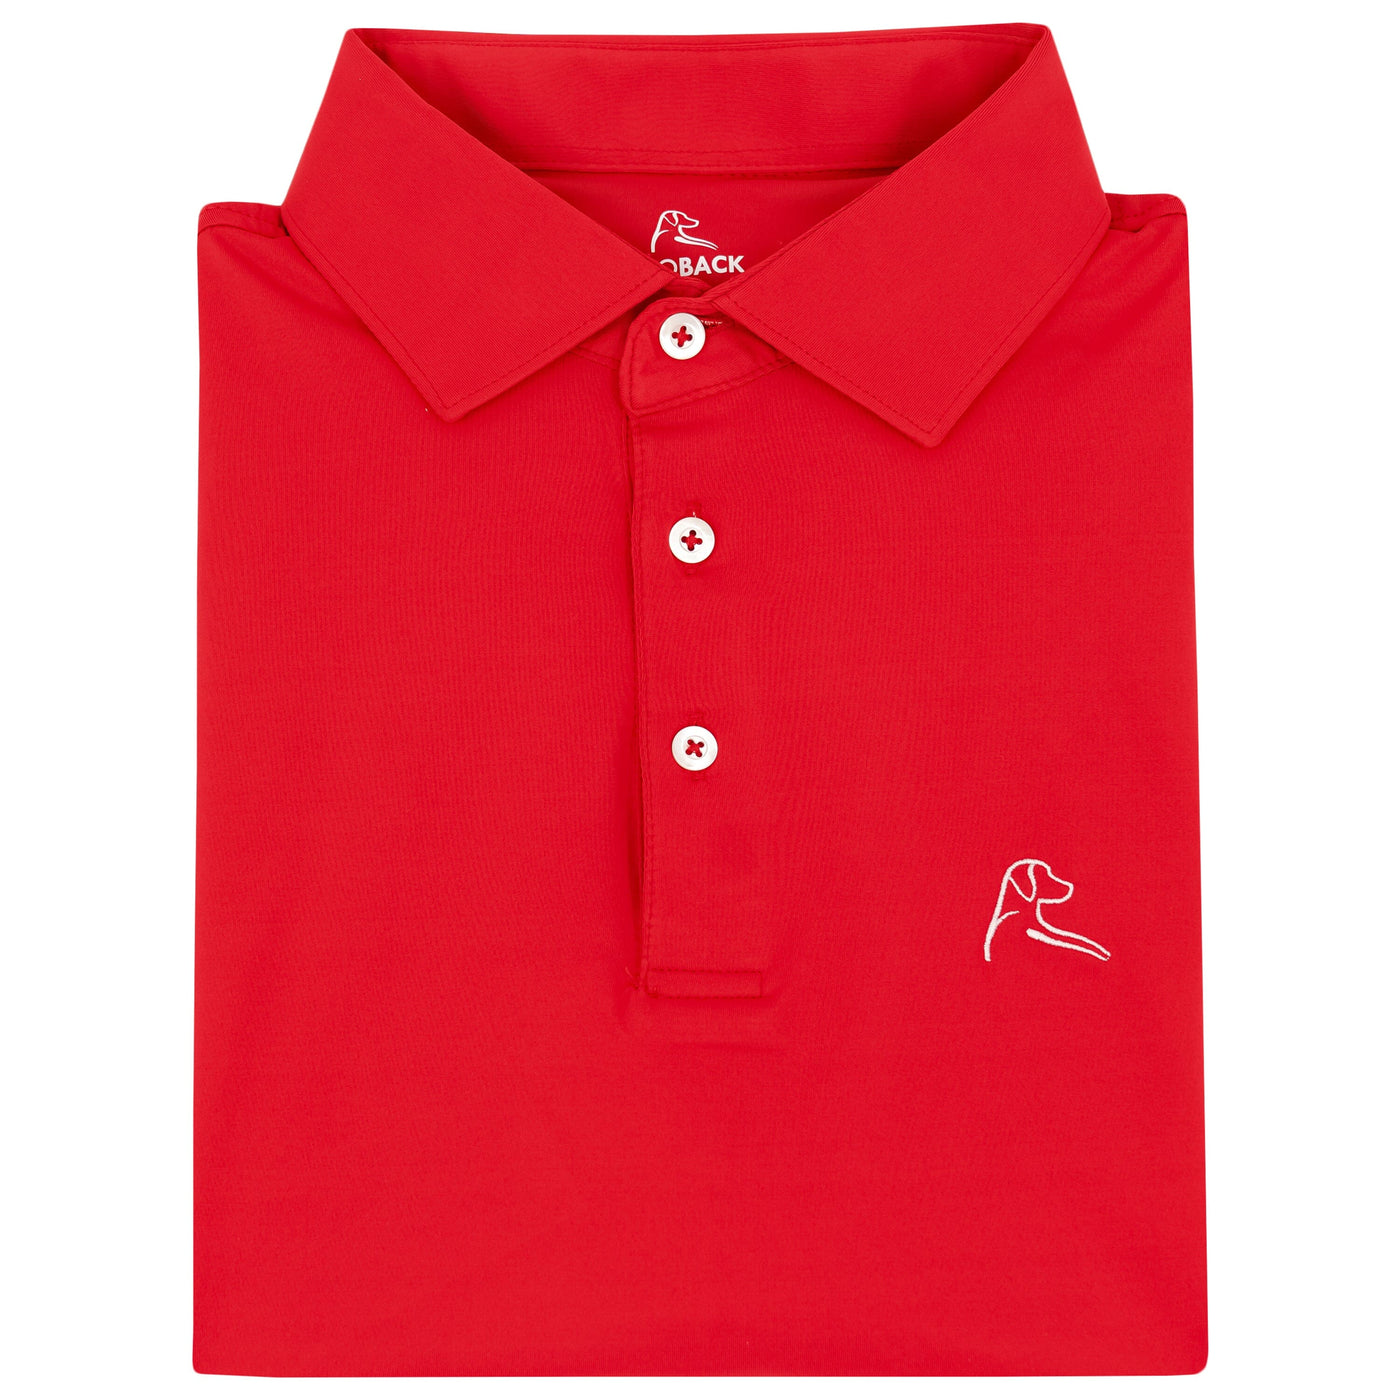 The Sunday Red Polo